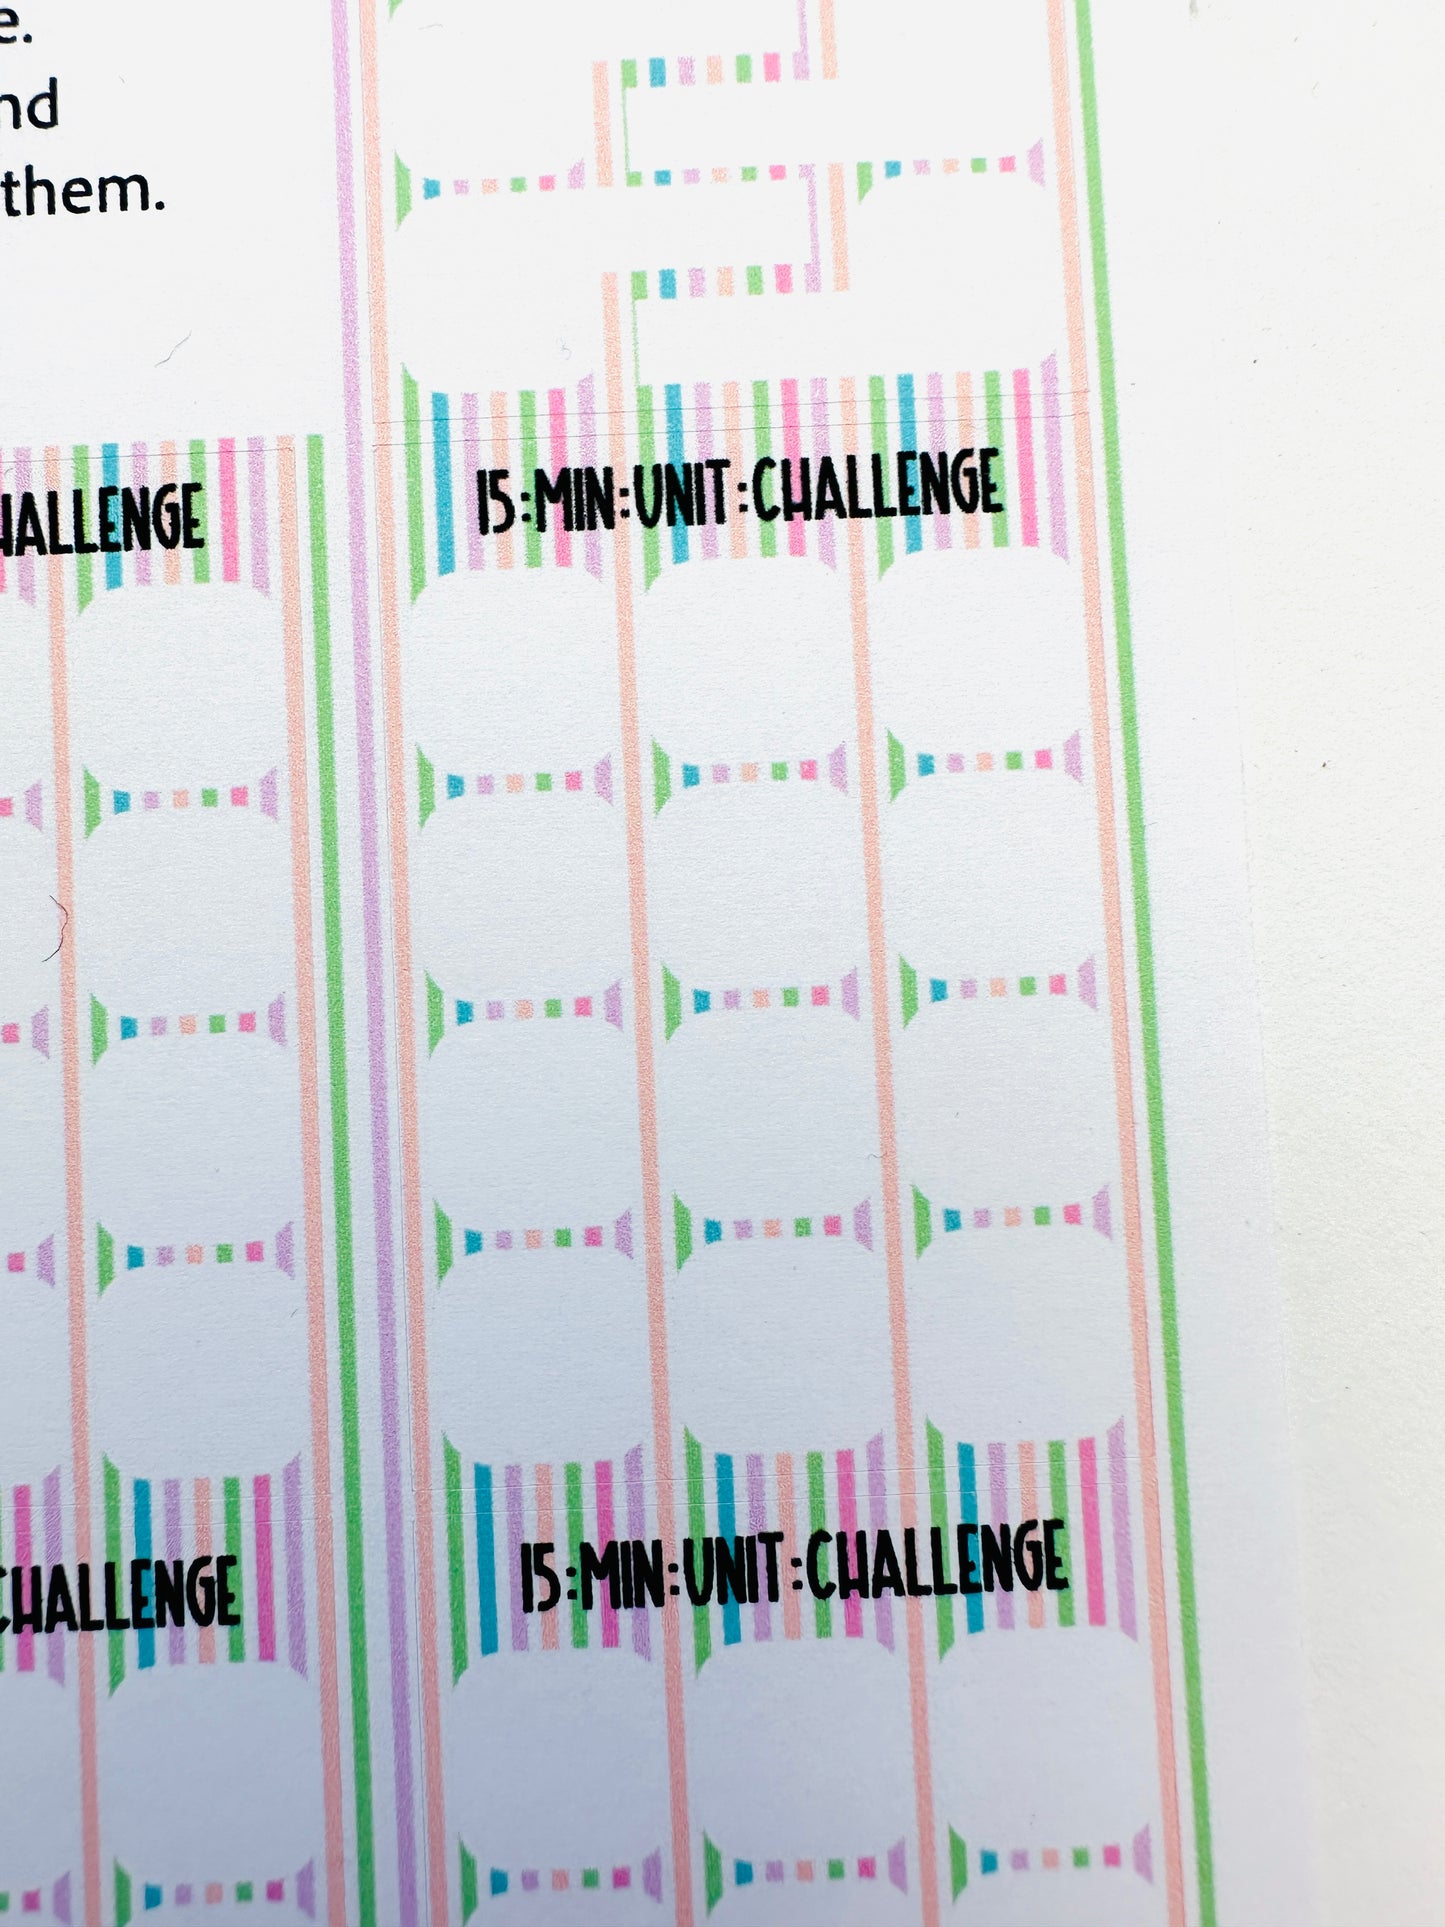 15 minute unit motivating, goal and savings challenge